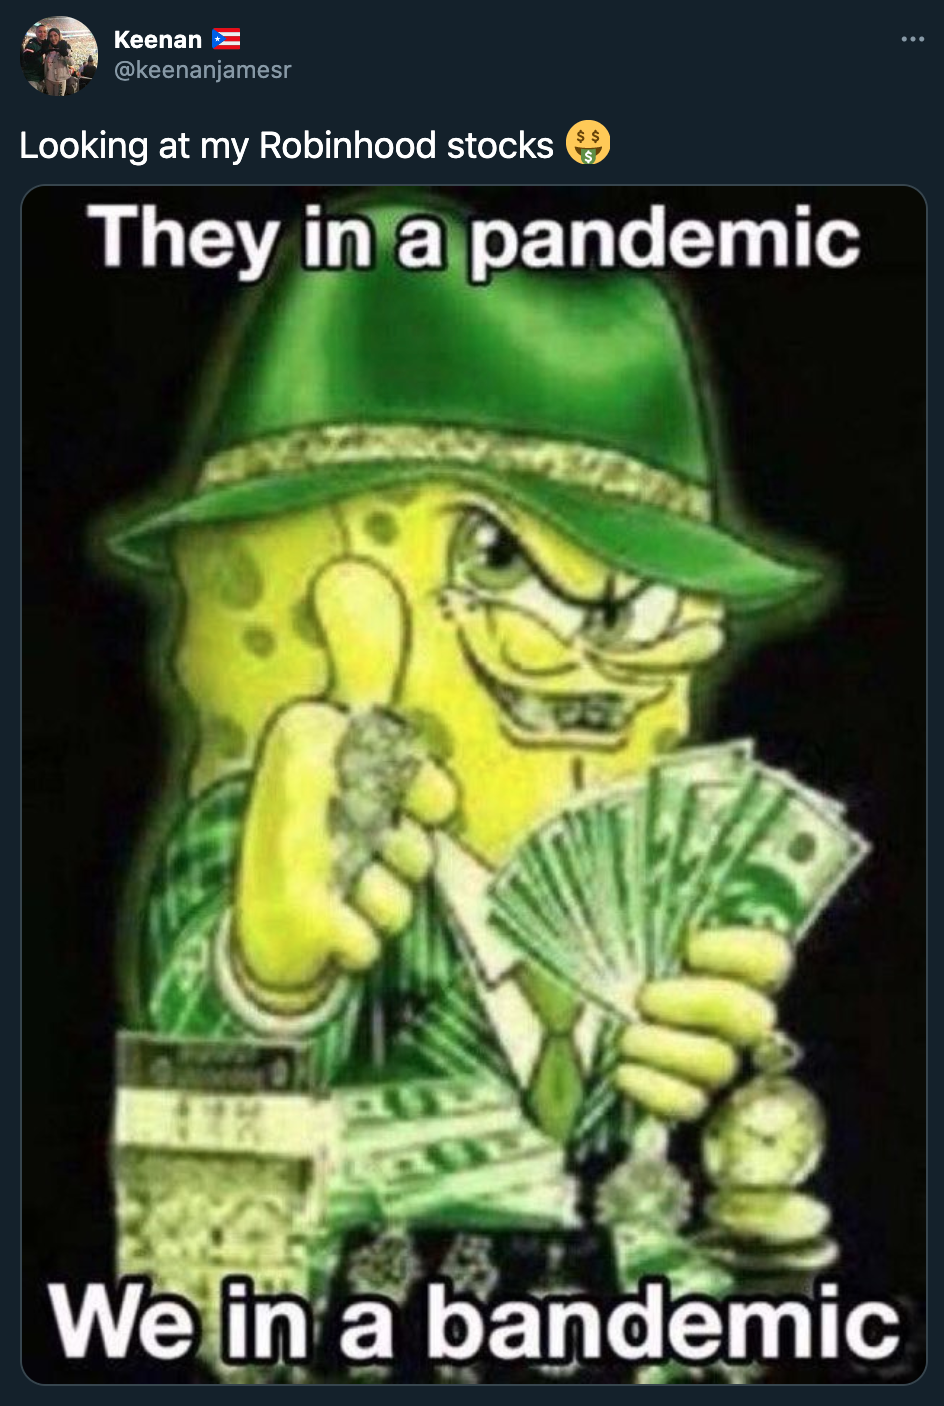 funny gamestop stock jokes - Looking at my Robinhood stocks They in a pandemic We in a bandemic